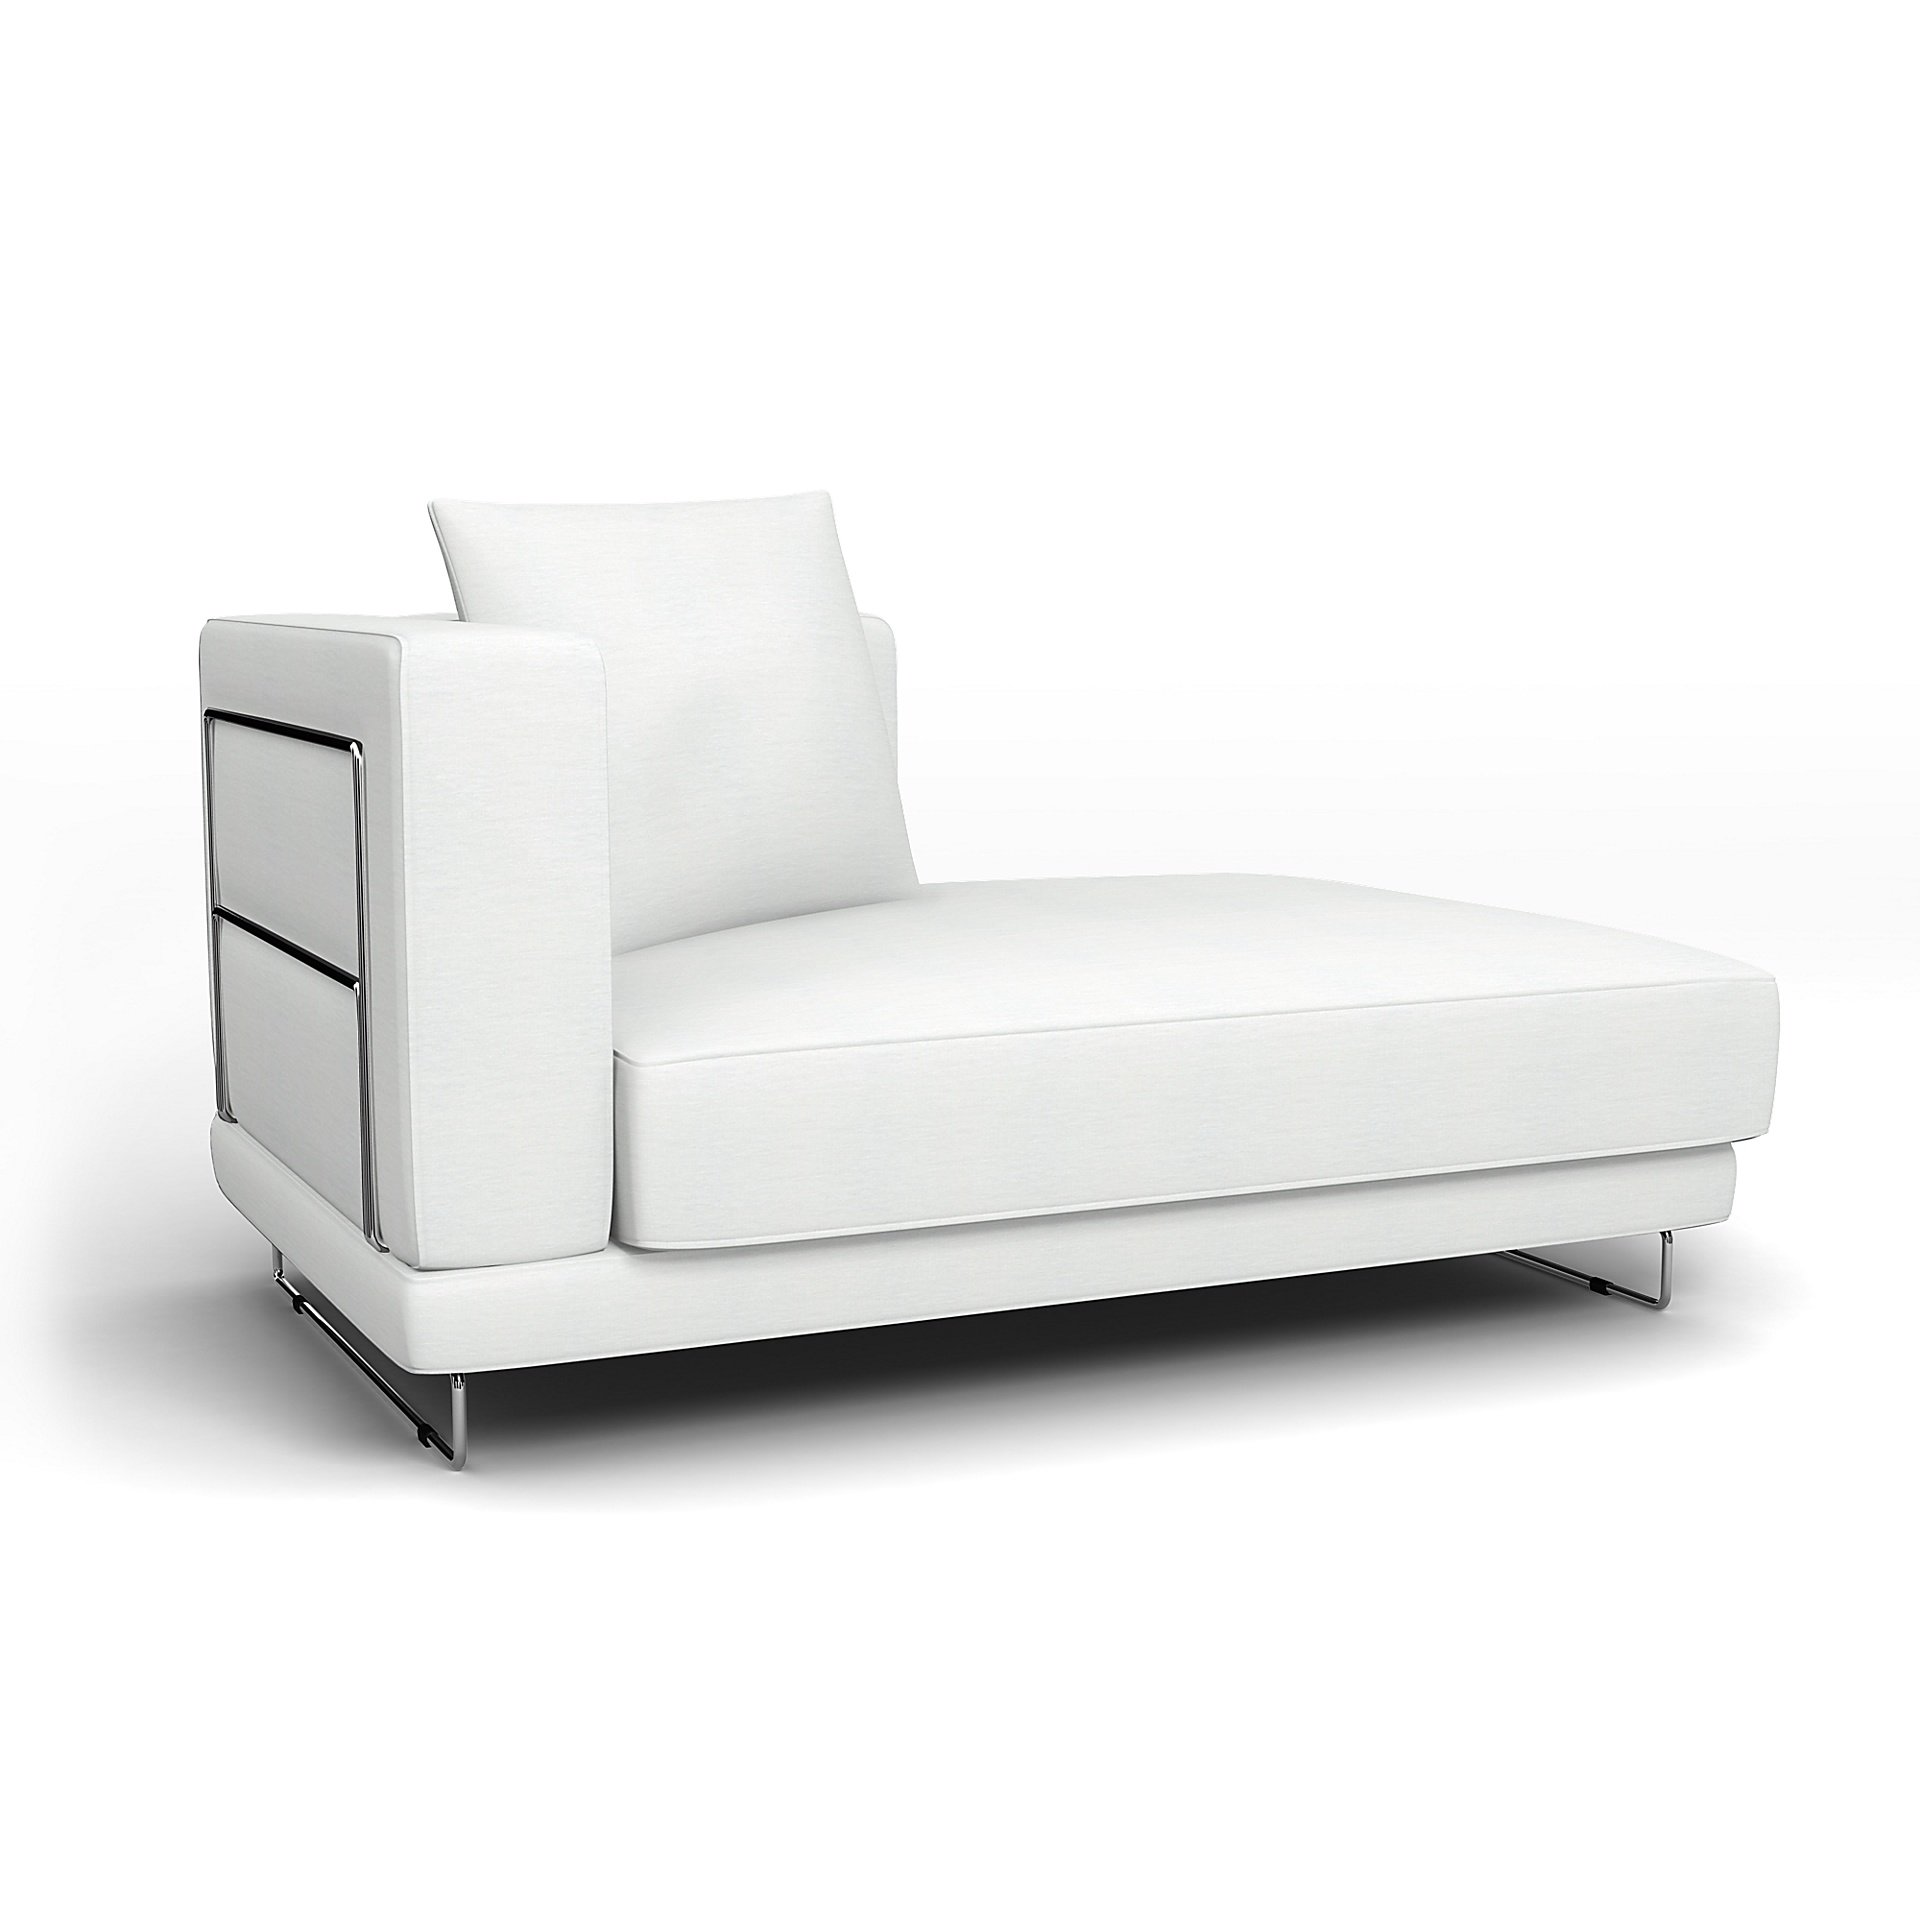 IKEA - Tylosand Chaise with Right Armrest Cover, White, Linen - Bemz